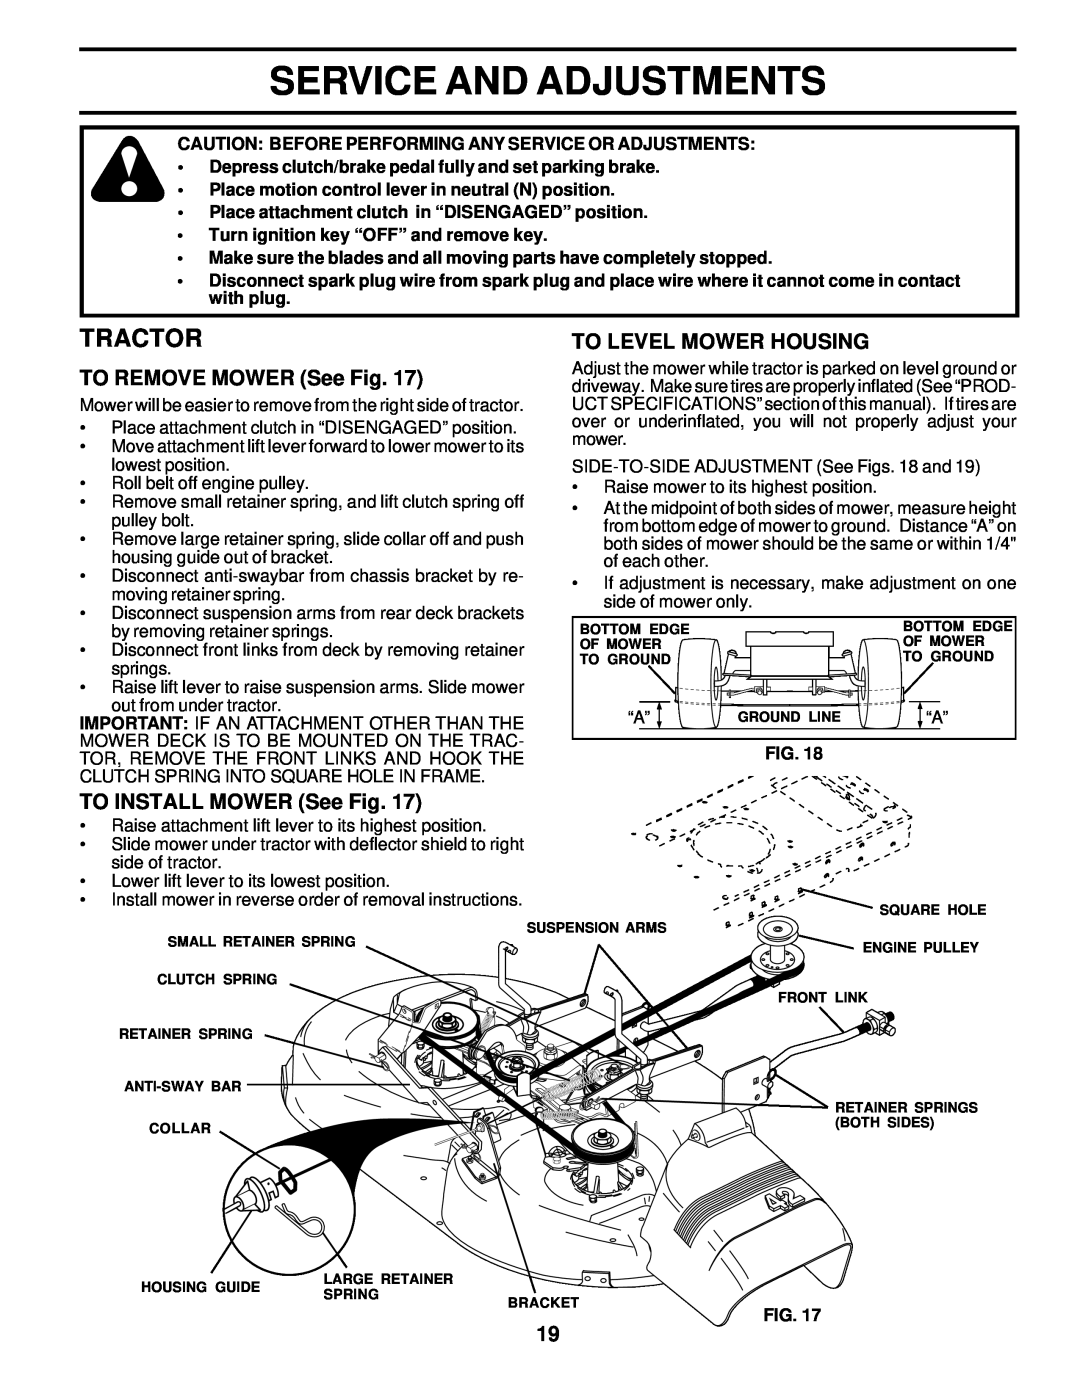 Poulan 176085 Service And Adjustments, TO REMOVE MOWER See Fig, To Level Mower Housing, TO INSTALL MOWER See Fig, Tractor 